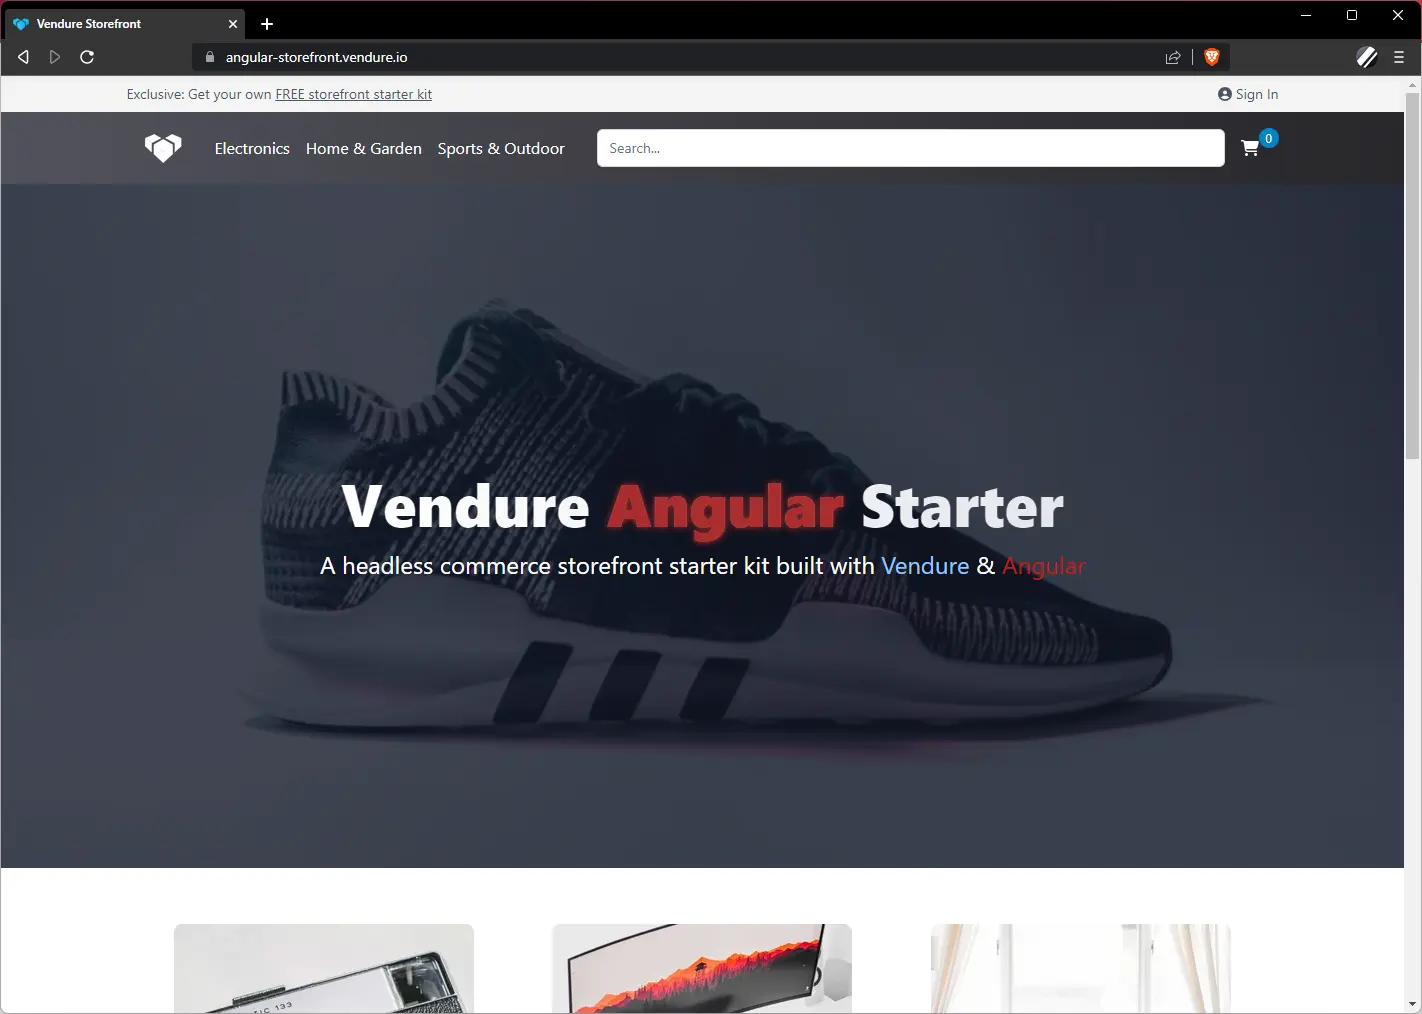 Screenshot of the storefront